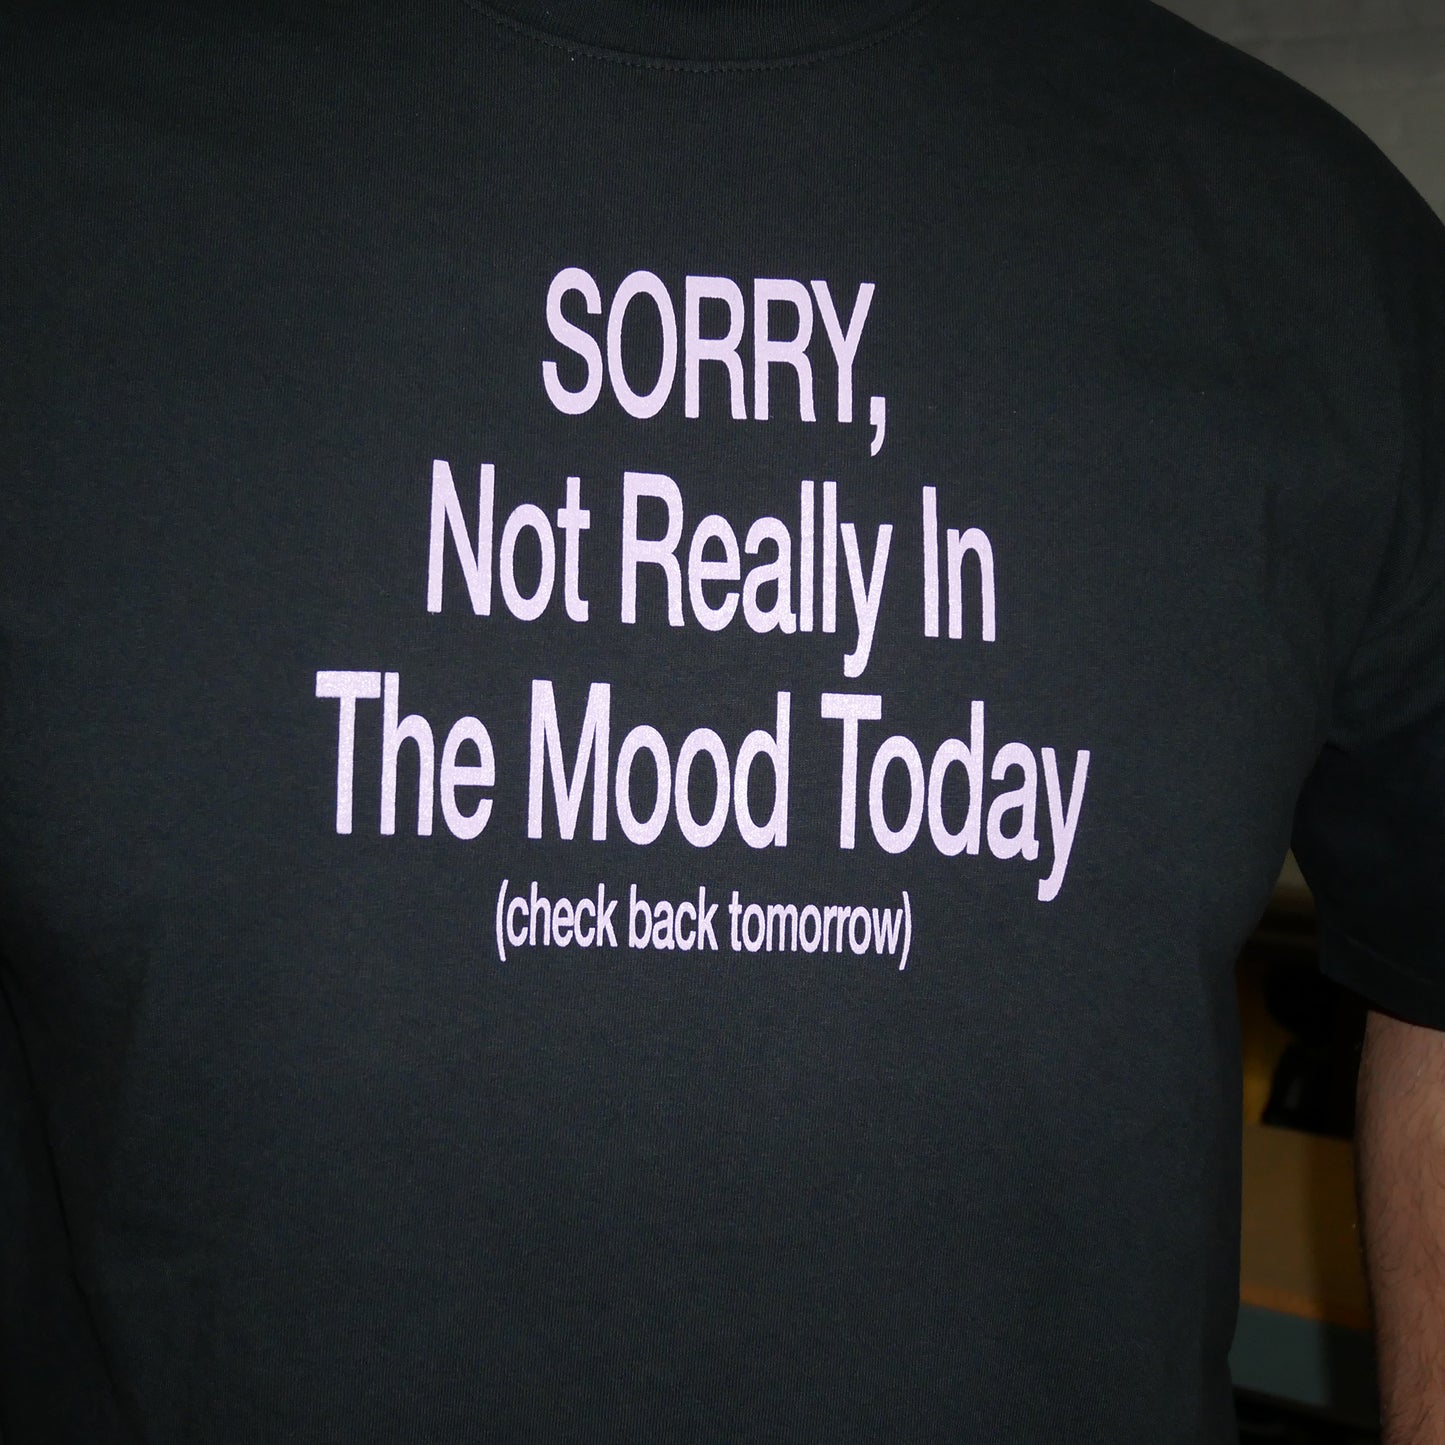 0.02 Not In The Mood Black Tee